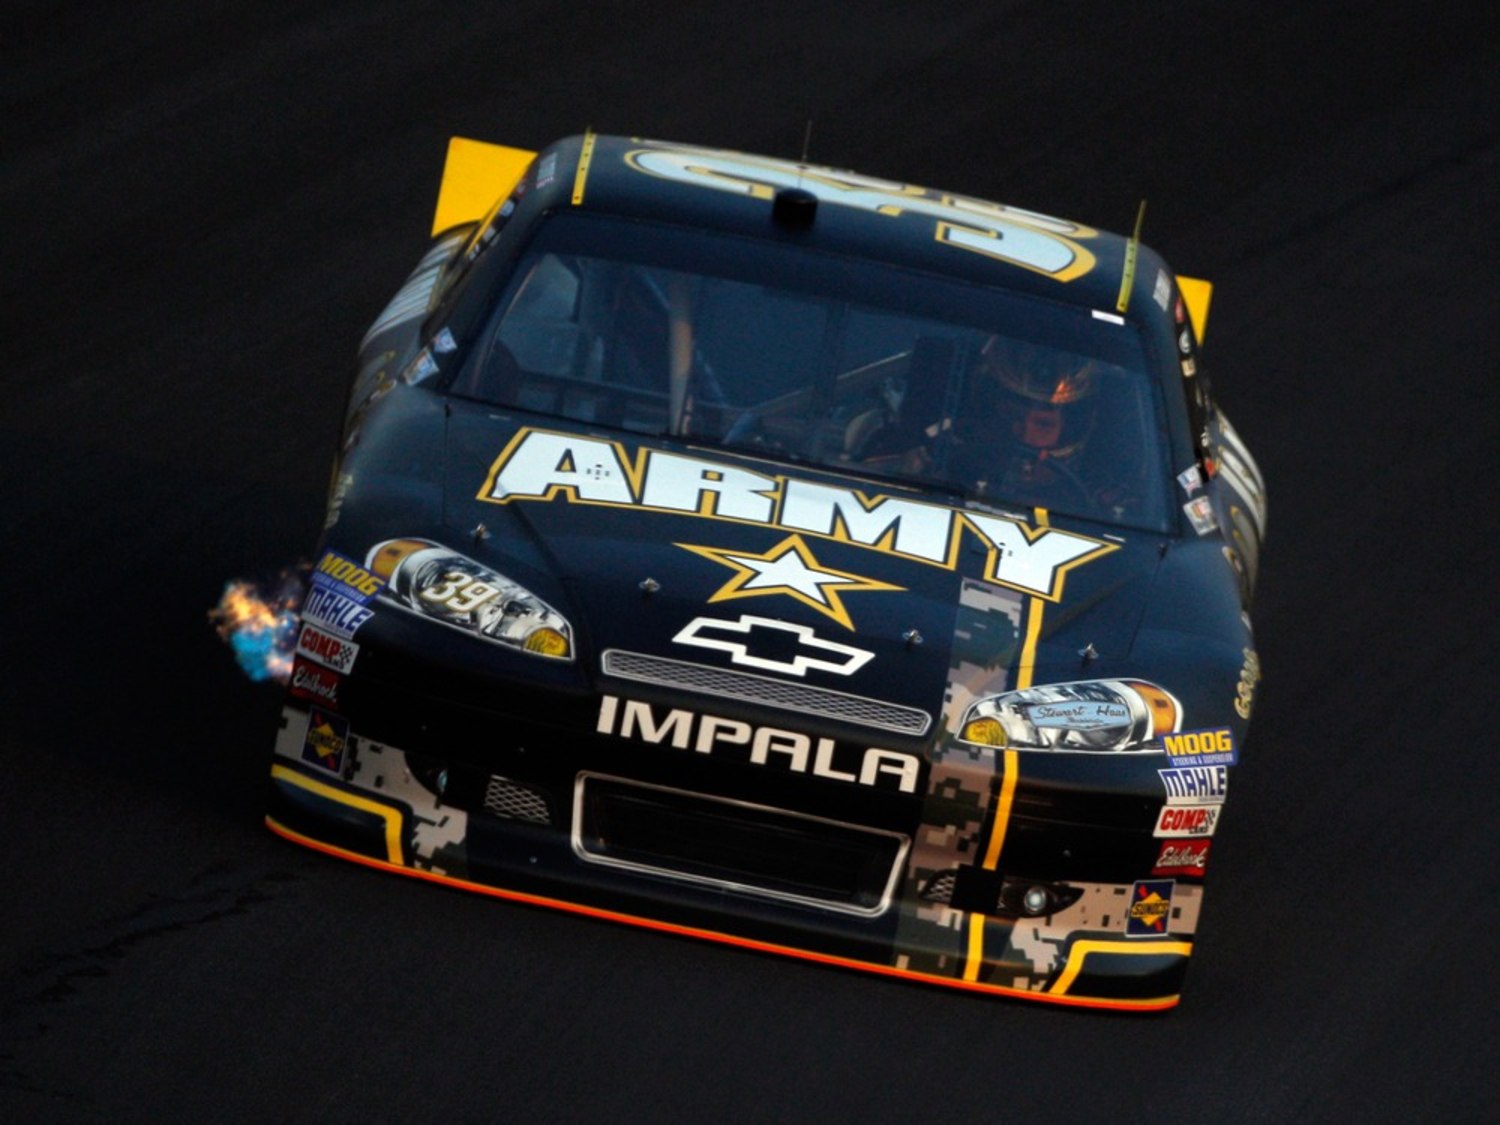 Army finds NASCAR racing less attractive option for recruiting youth